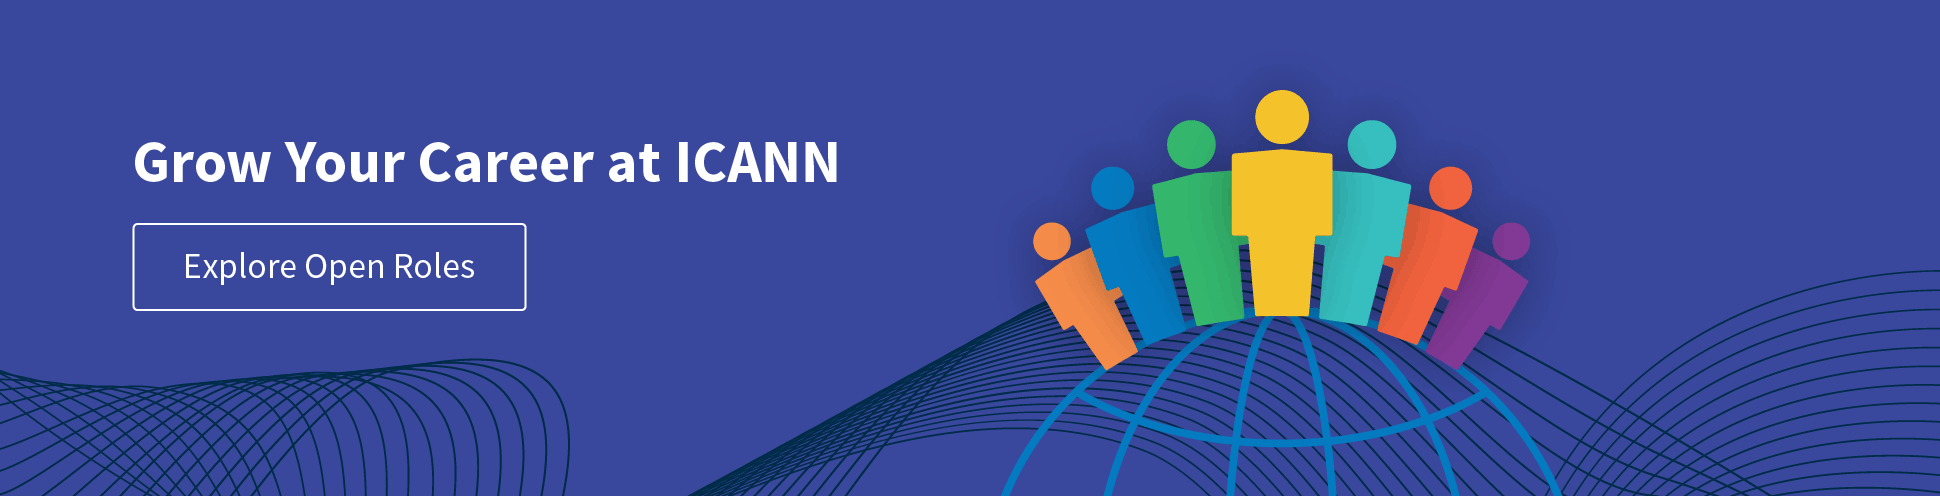 Grow your career at ICANN. Explore open roles.